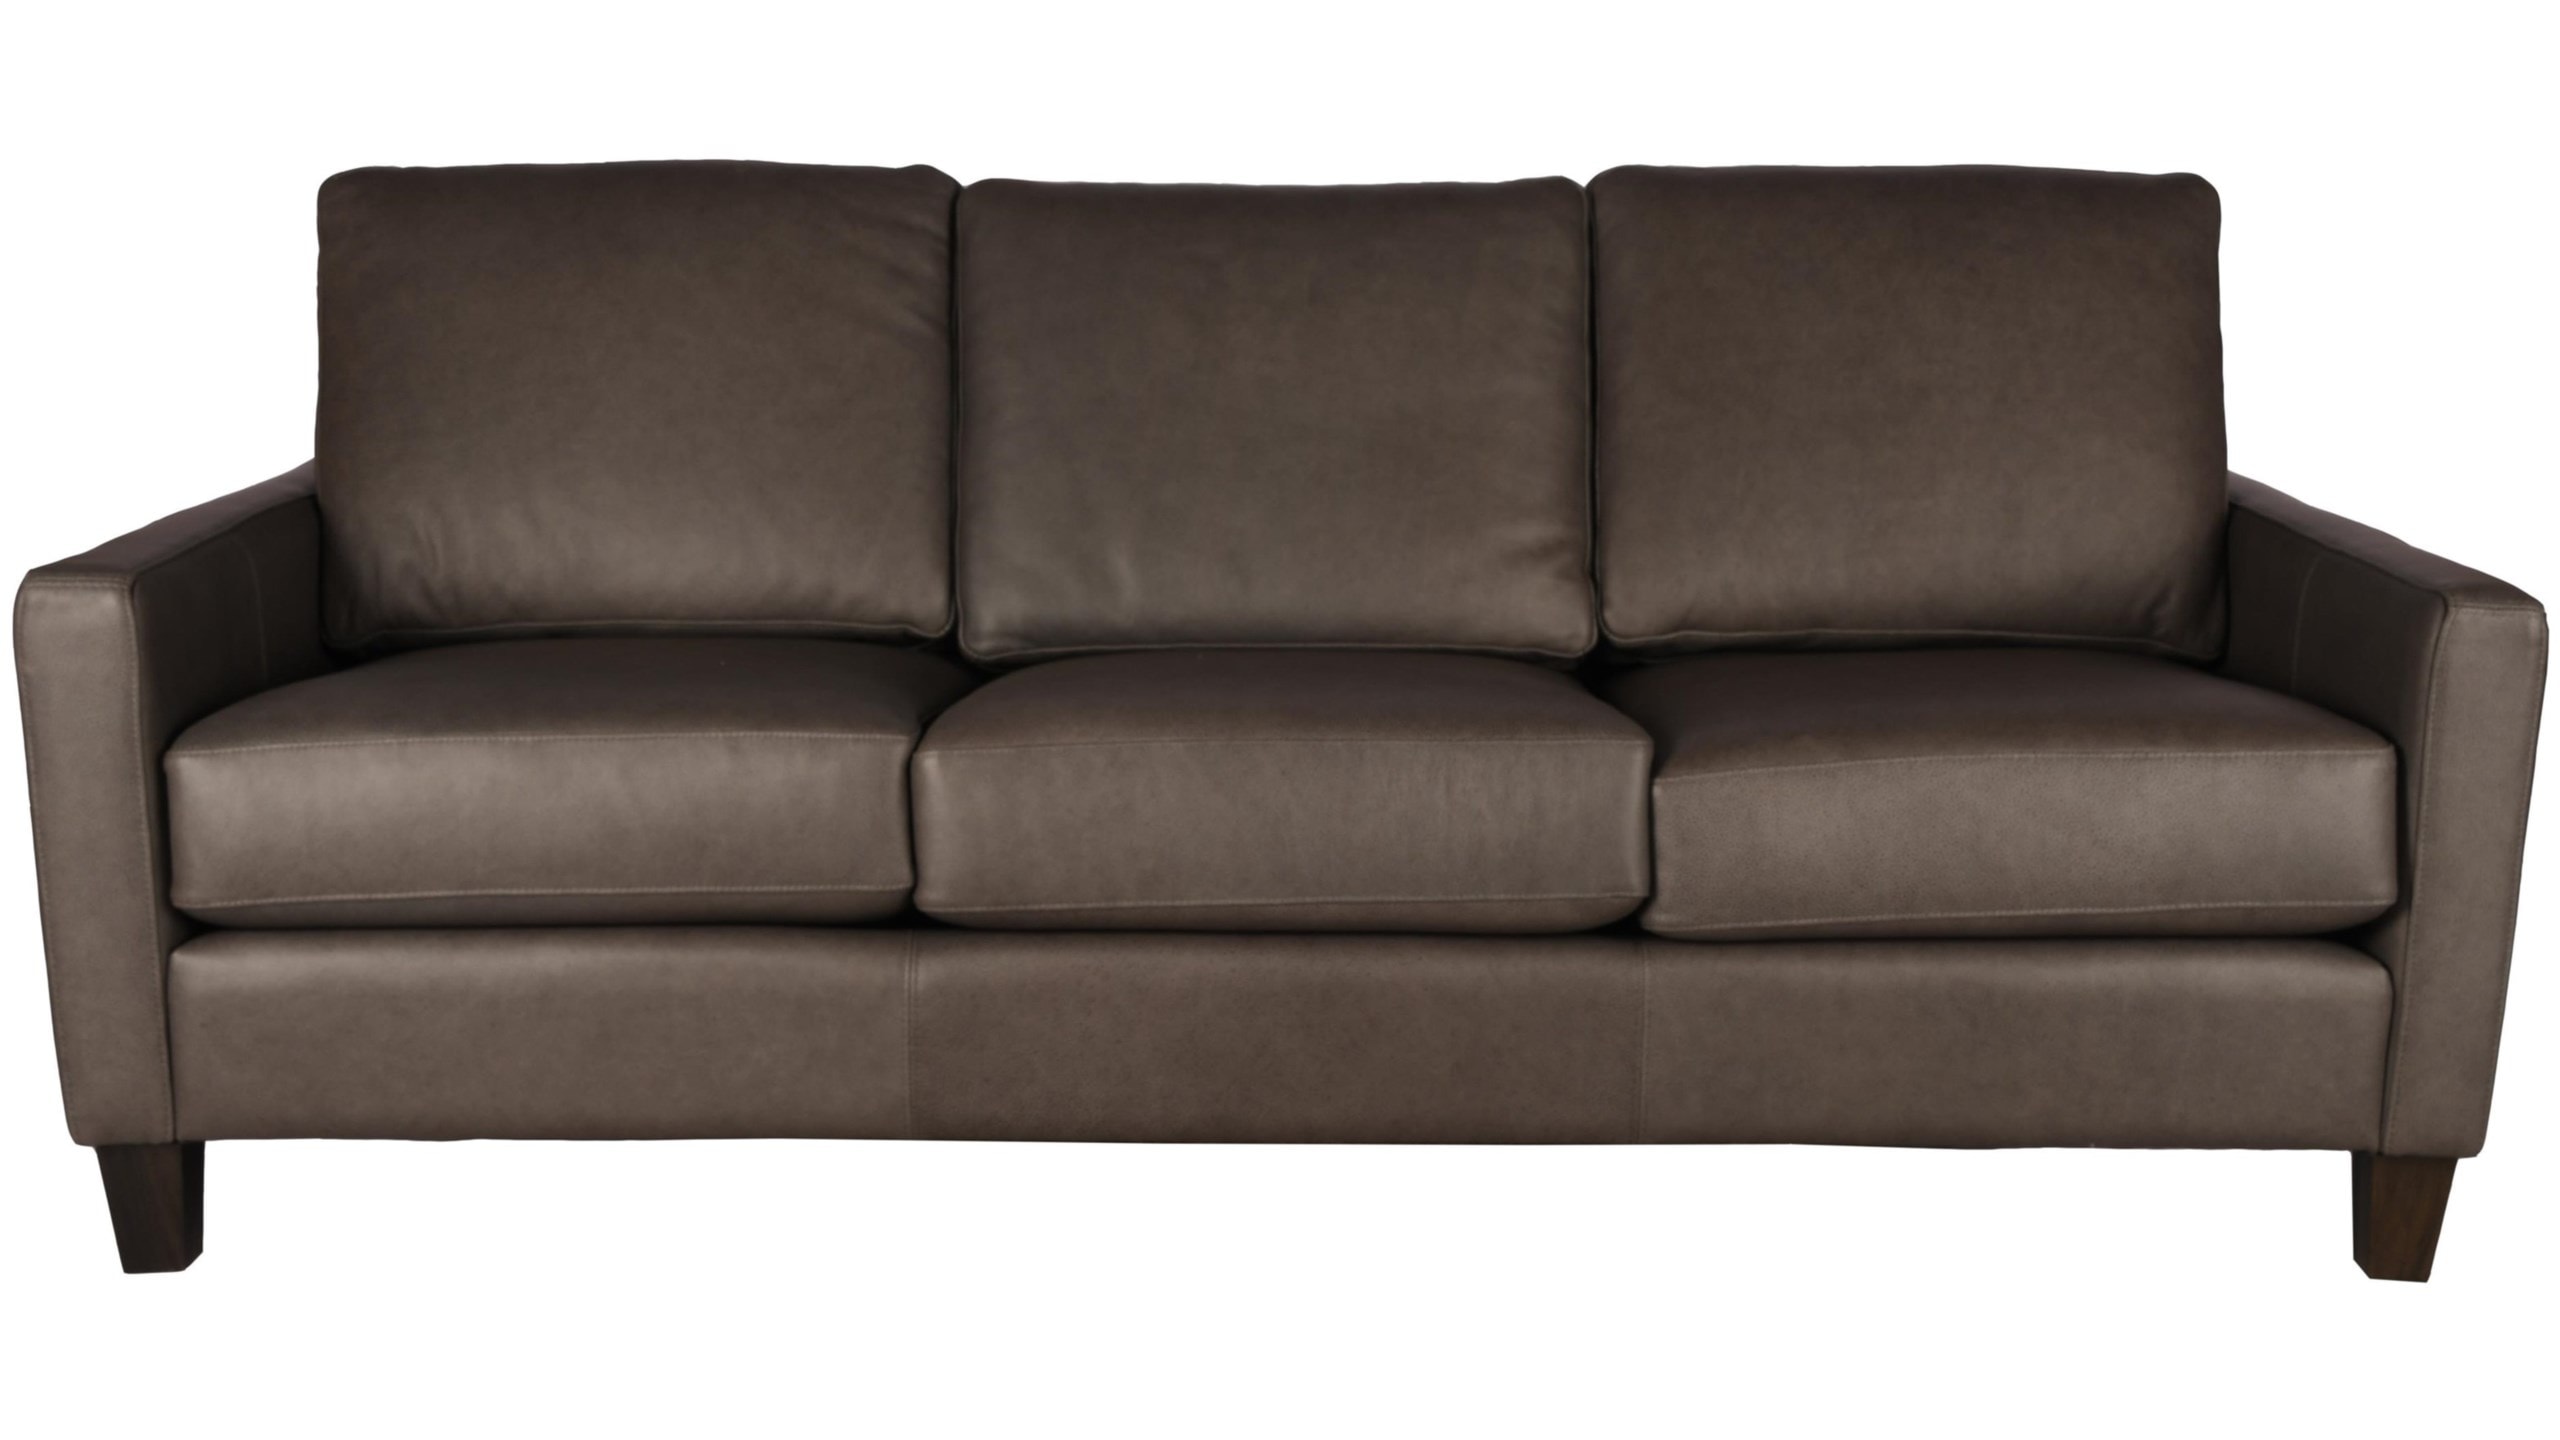 Shop the Sofa from Option 1